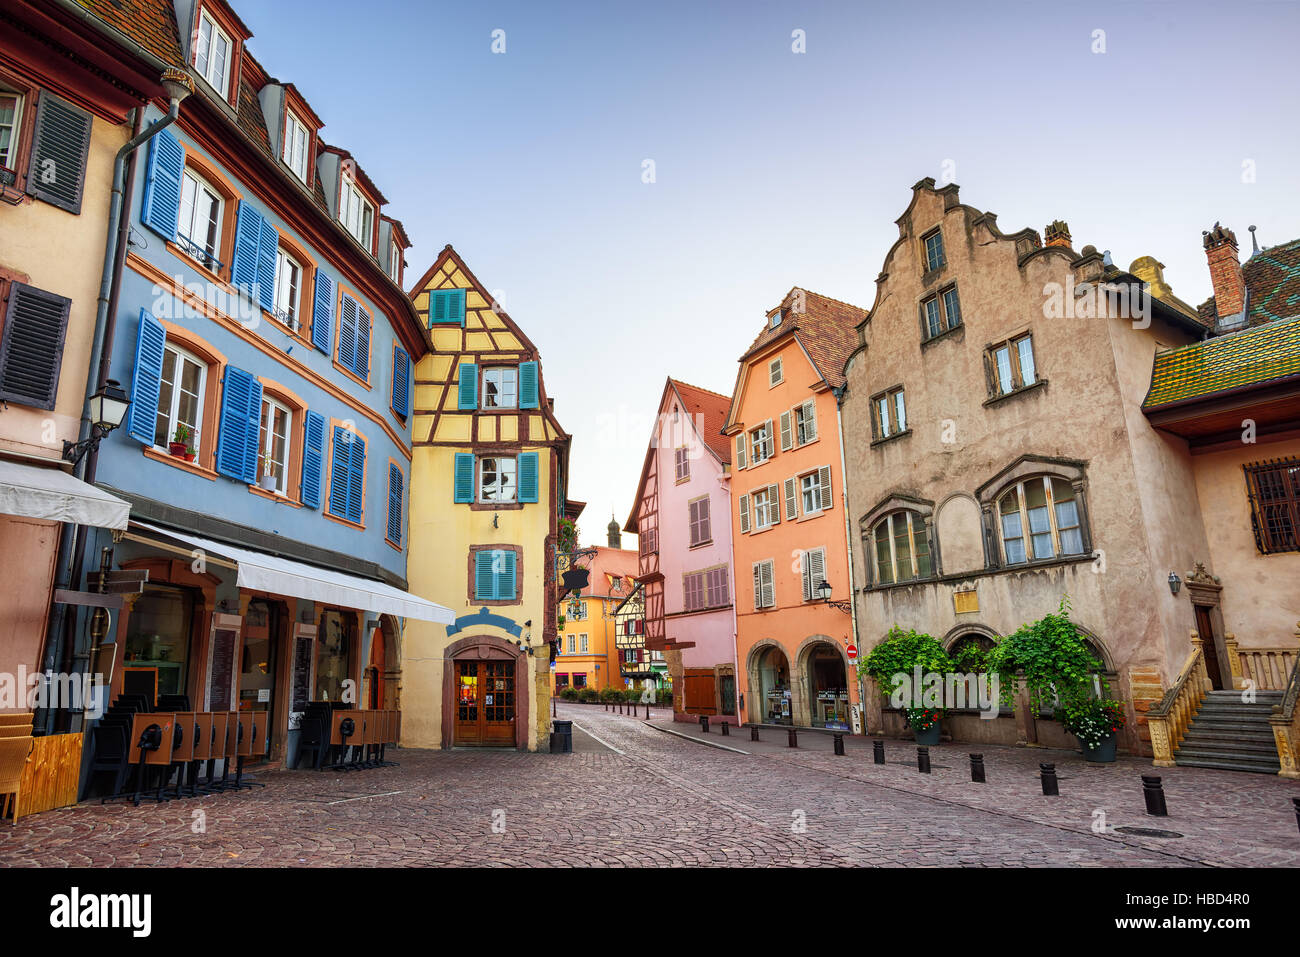 Colorful houses in Colmar, France Stock Photo